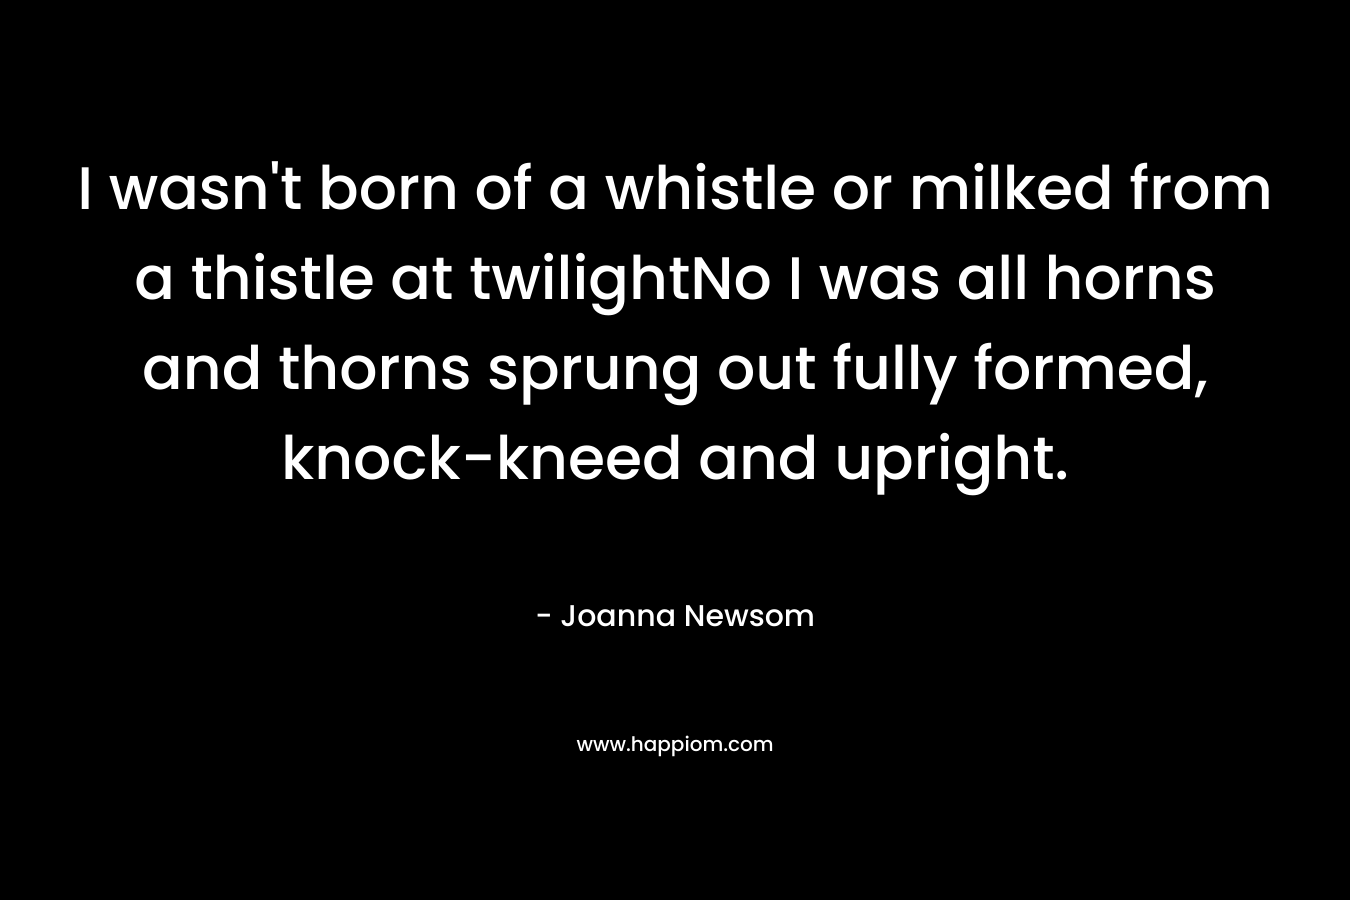 I wasn't born of a whistle or milked from a thistle at twilightNo I was all horns and thorns sprung out fully formed, knock-kneed and upright.